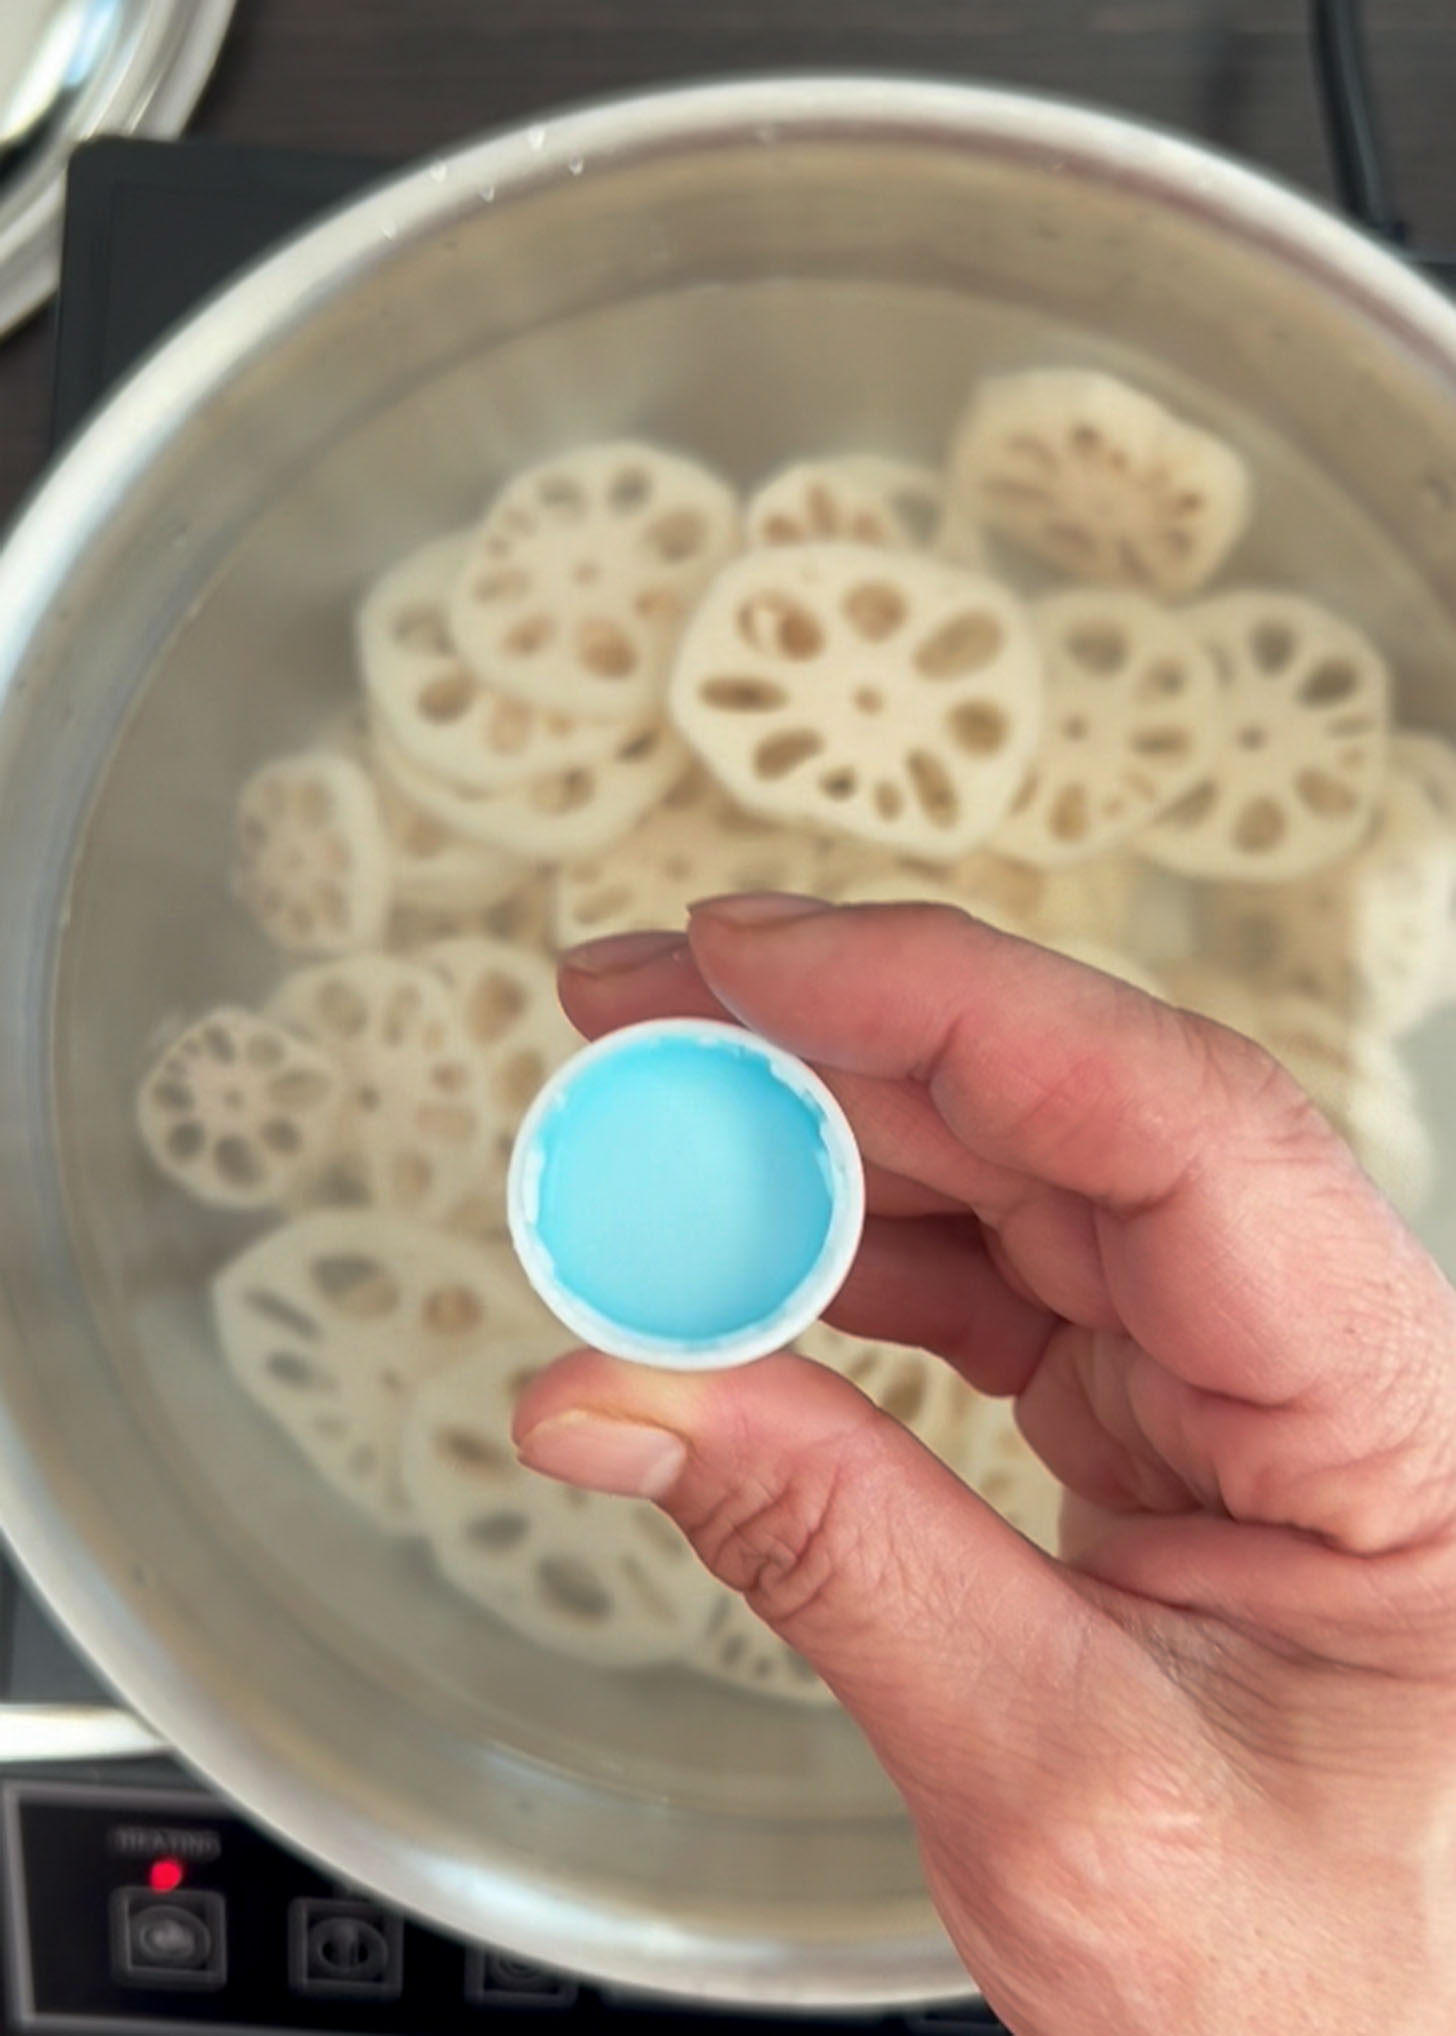 Vinegar is added to water to boil lotus root slices in a pot.